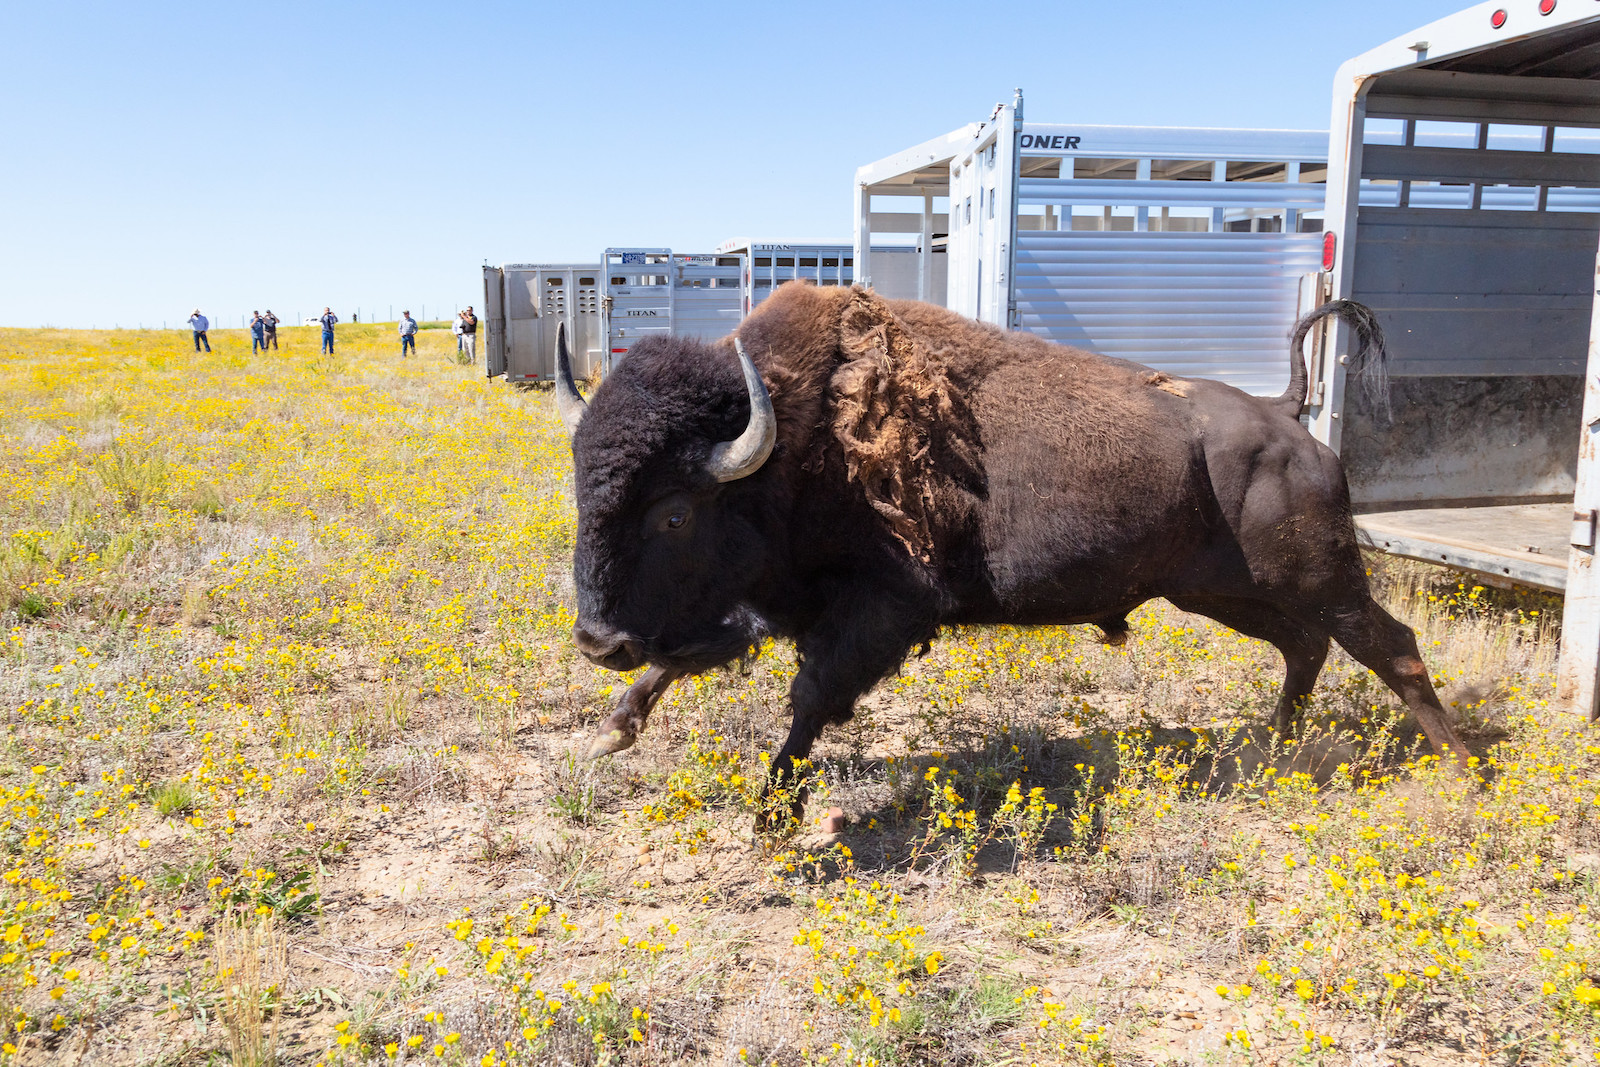 a bison runs away from a truck after release